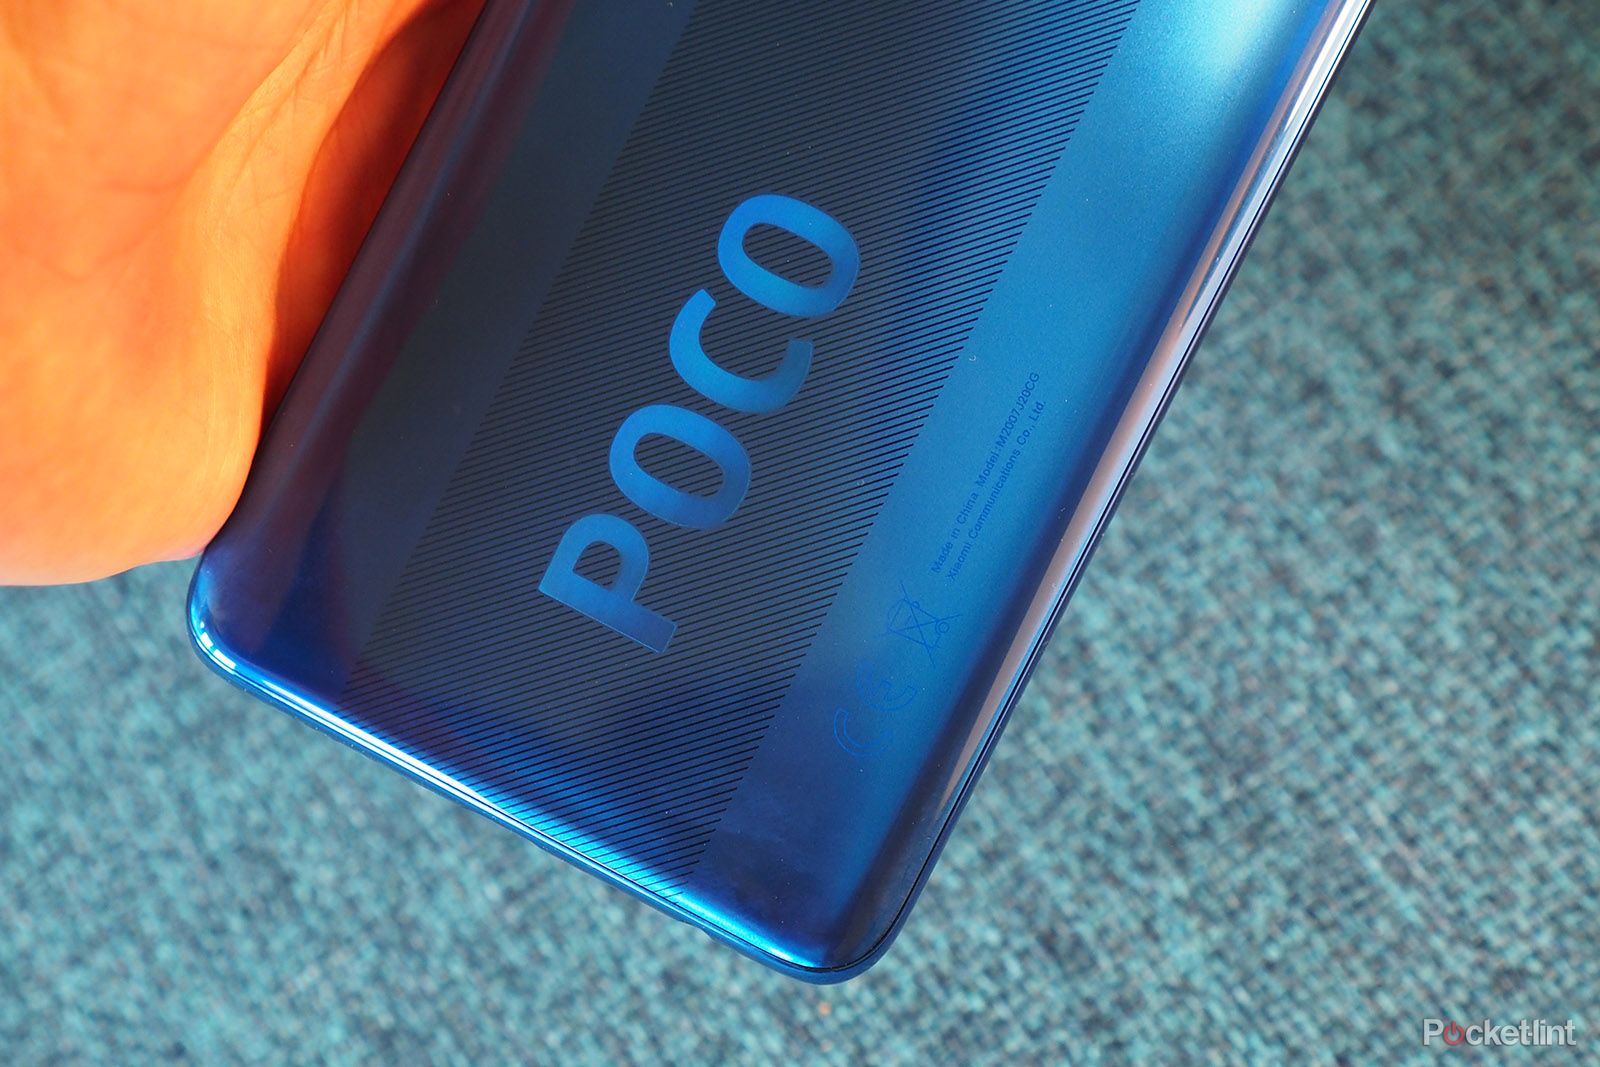 Redmi K40 likely to get global launch as Poco F3 photo 1